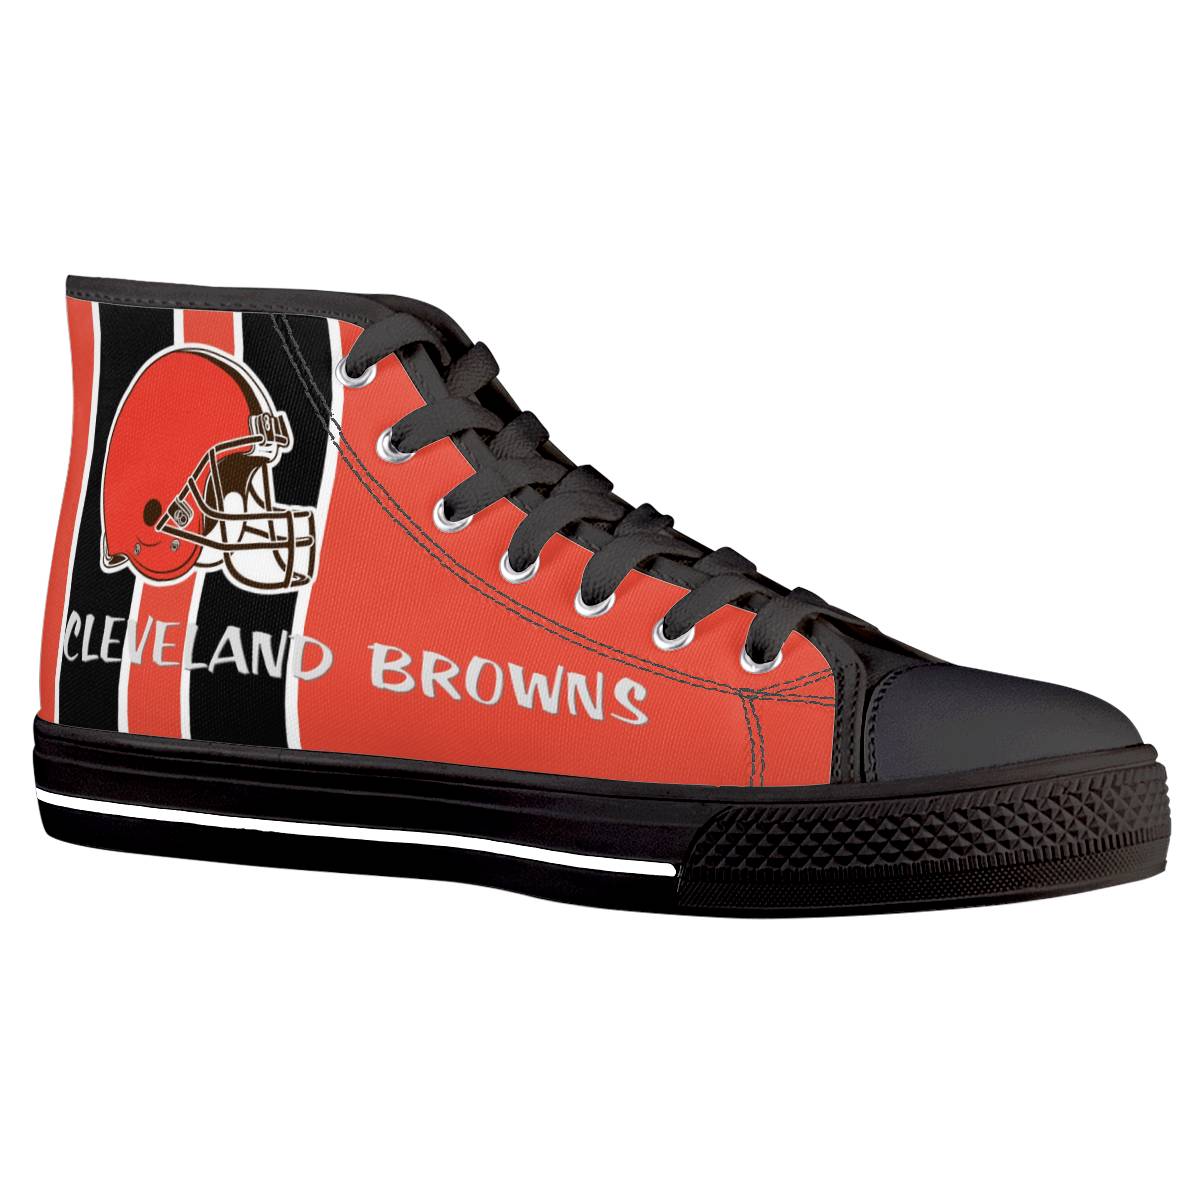 Men's Cleveland Browns High Top Canvas Sneakers 003